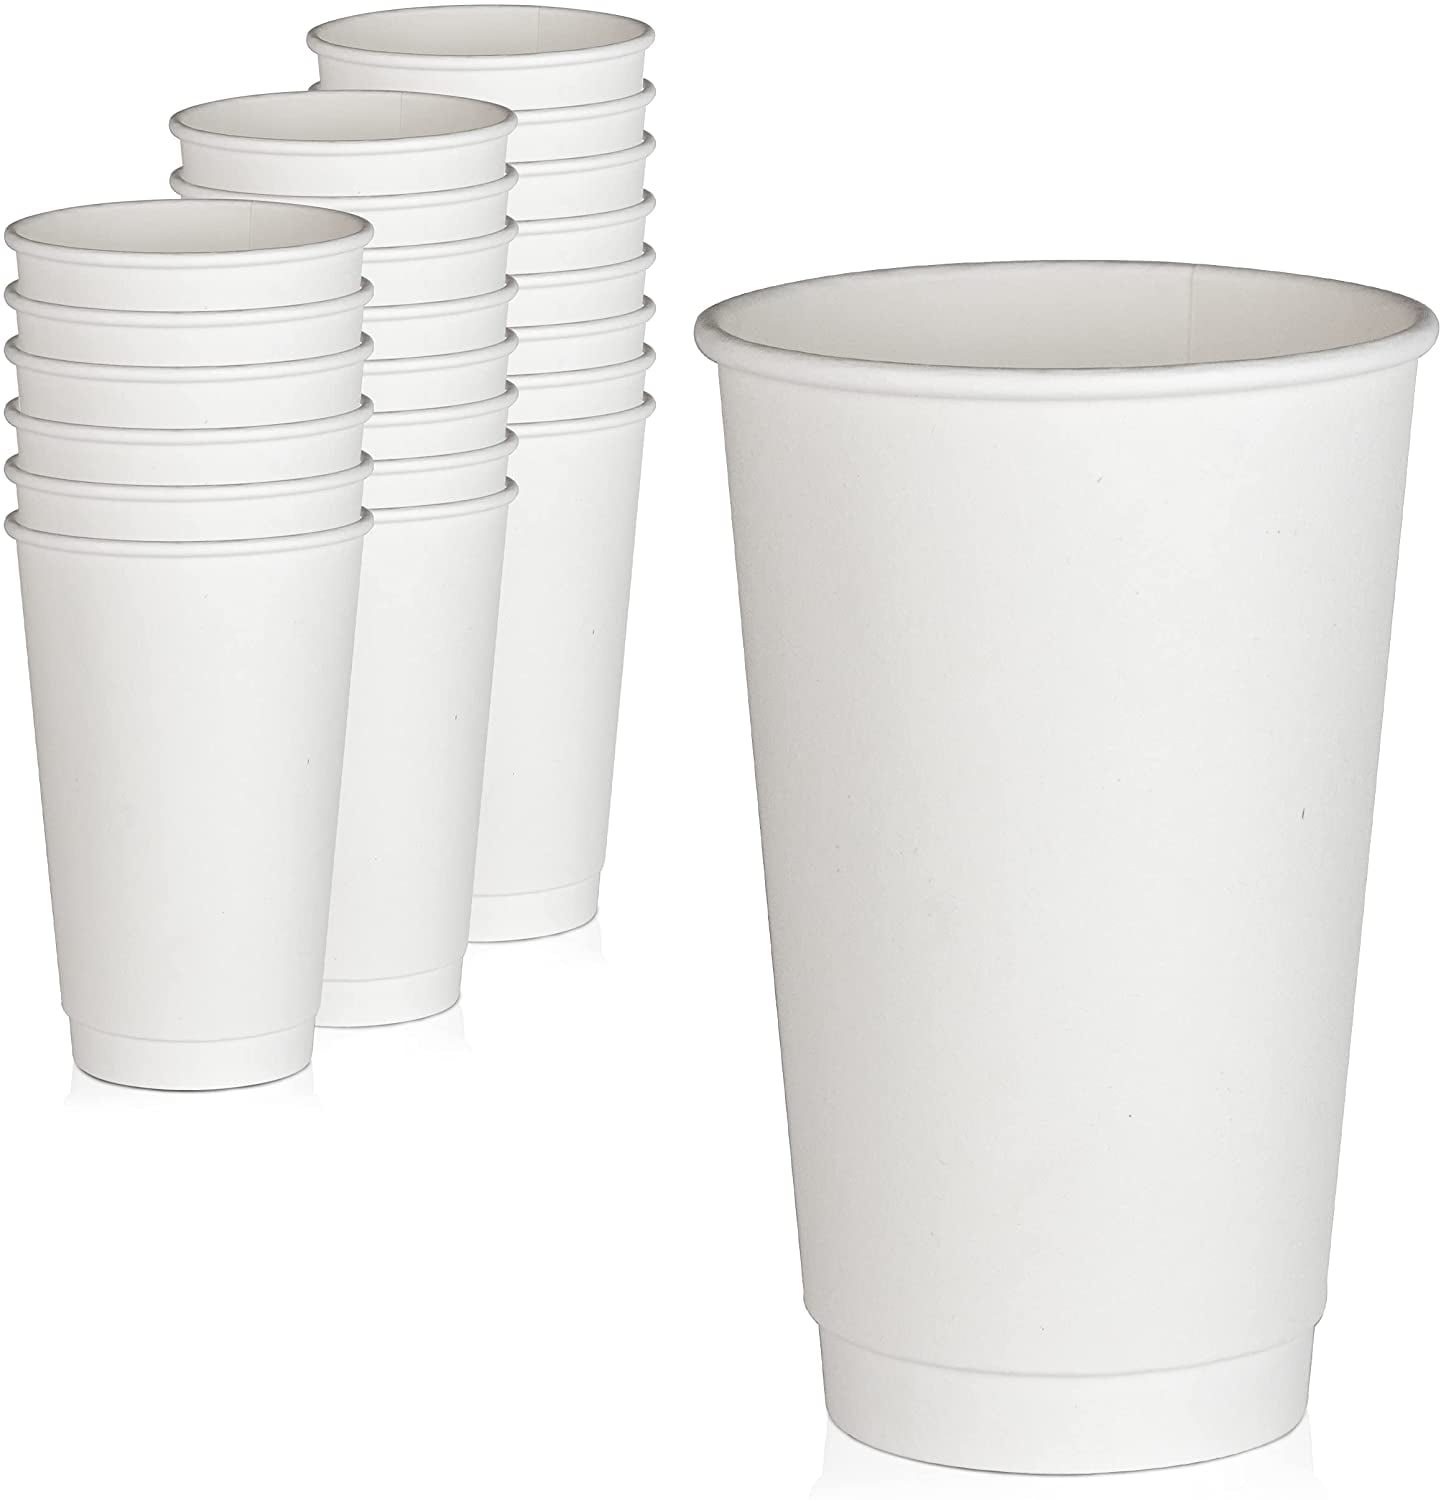 Harvest Pack 16 oz Insulated Ripple Double-Walled Paper Cup with Lid Black and White Geometric Coffee Tea Hot Chocolate Drinks to Go [85 Set]